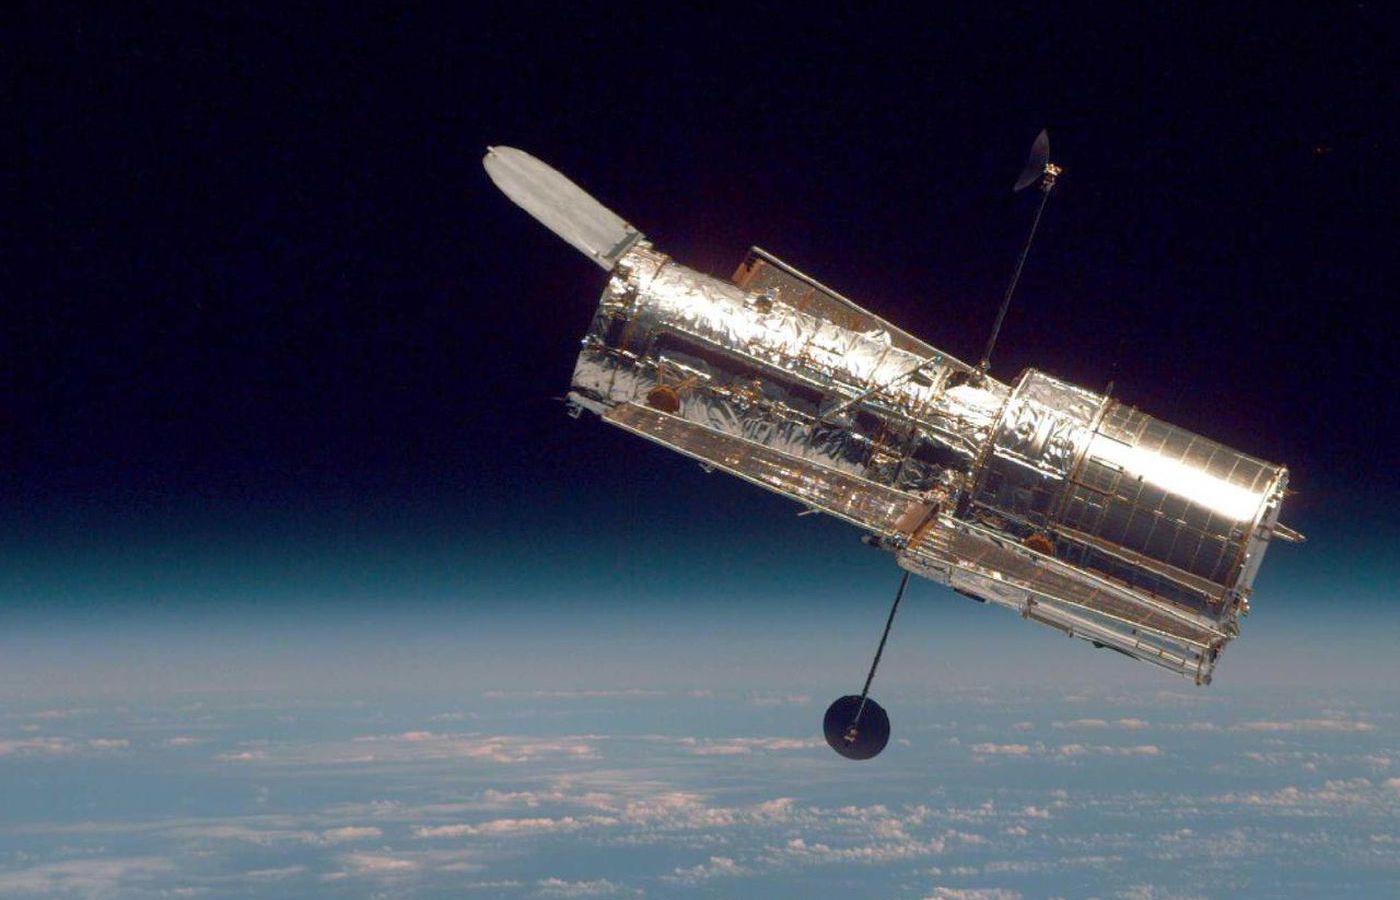 The Hubble photographed by the Space Shuttle Discovery.  Credits: NASA.